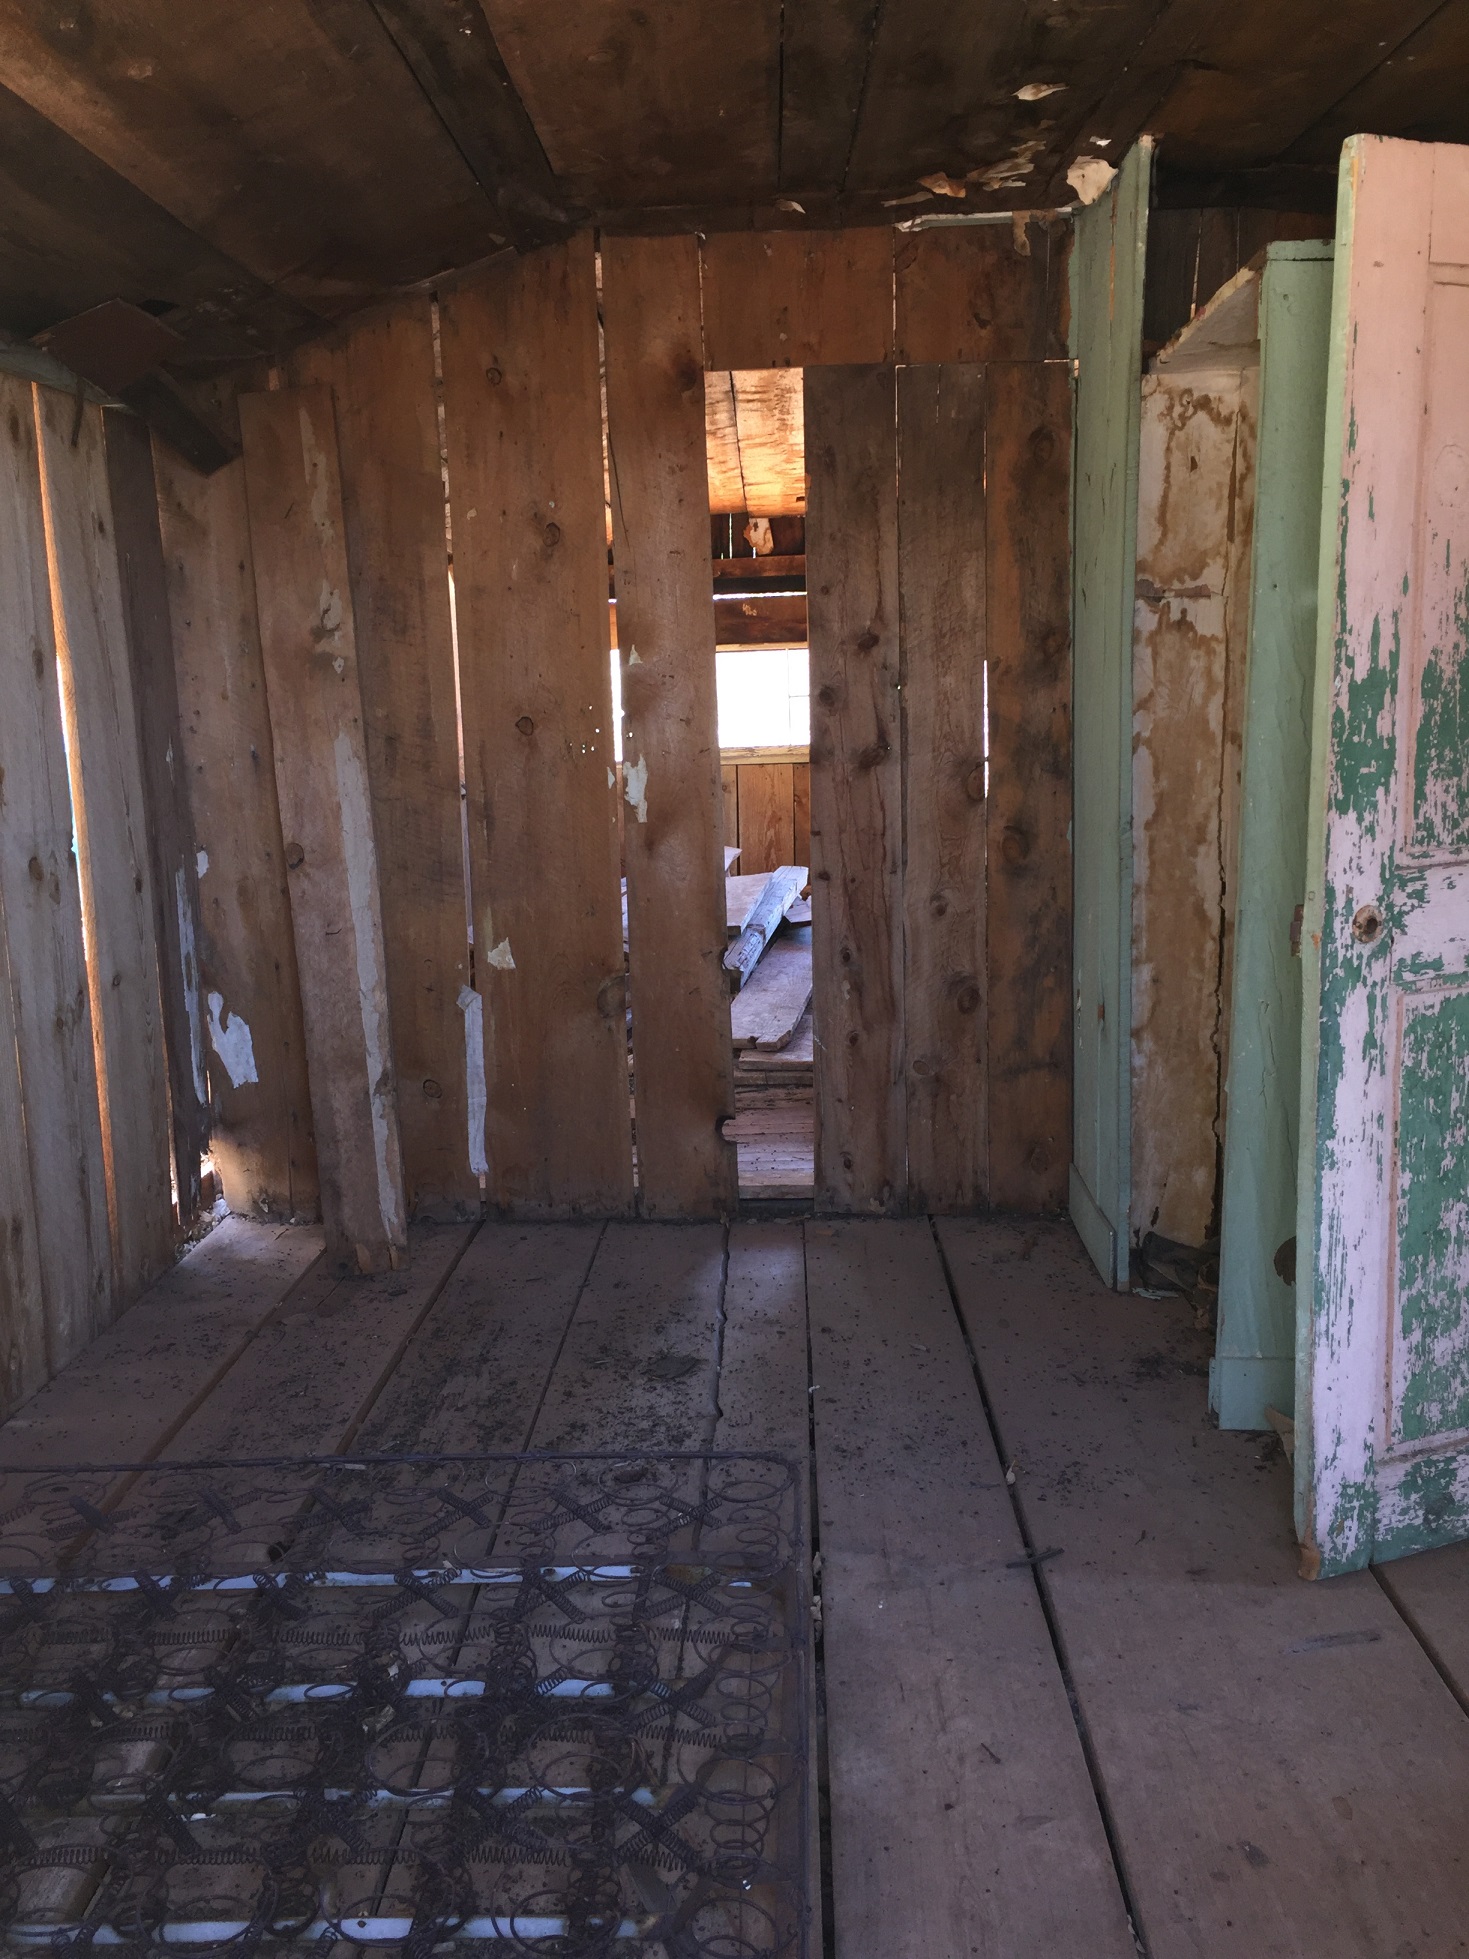 An inside room of the Pine Cabin on the Arizona Strip